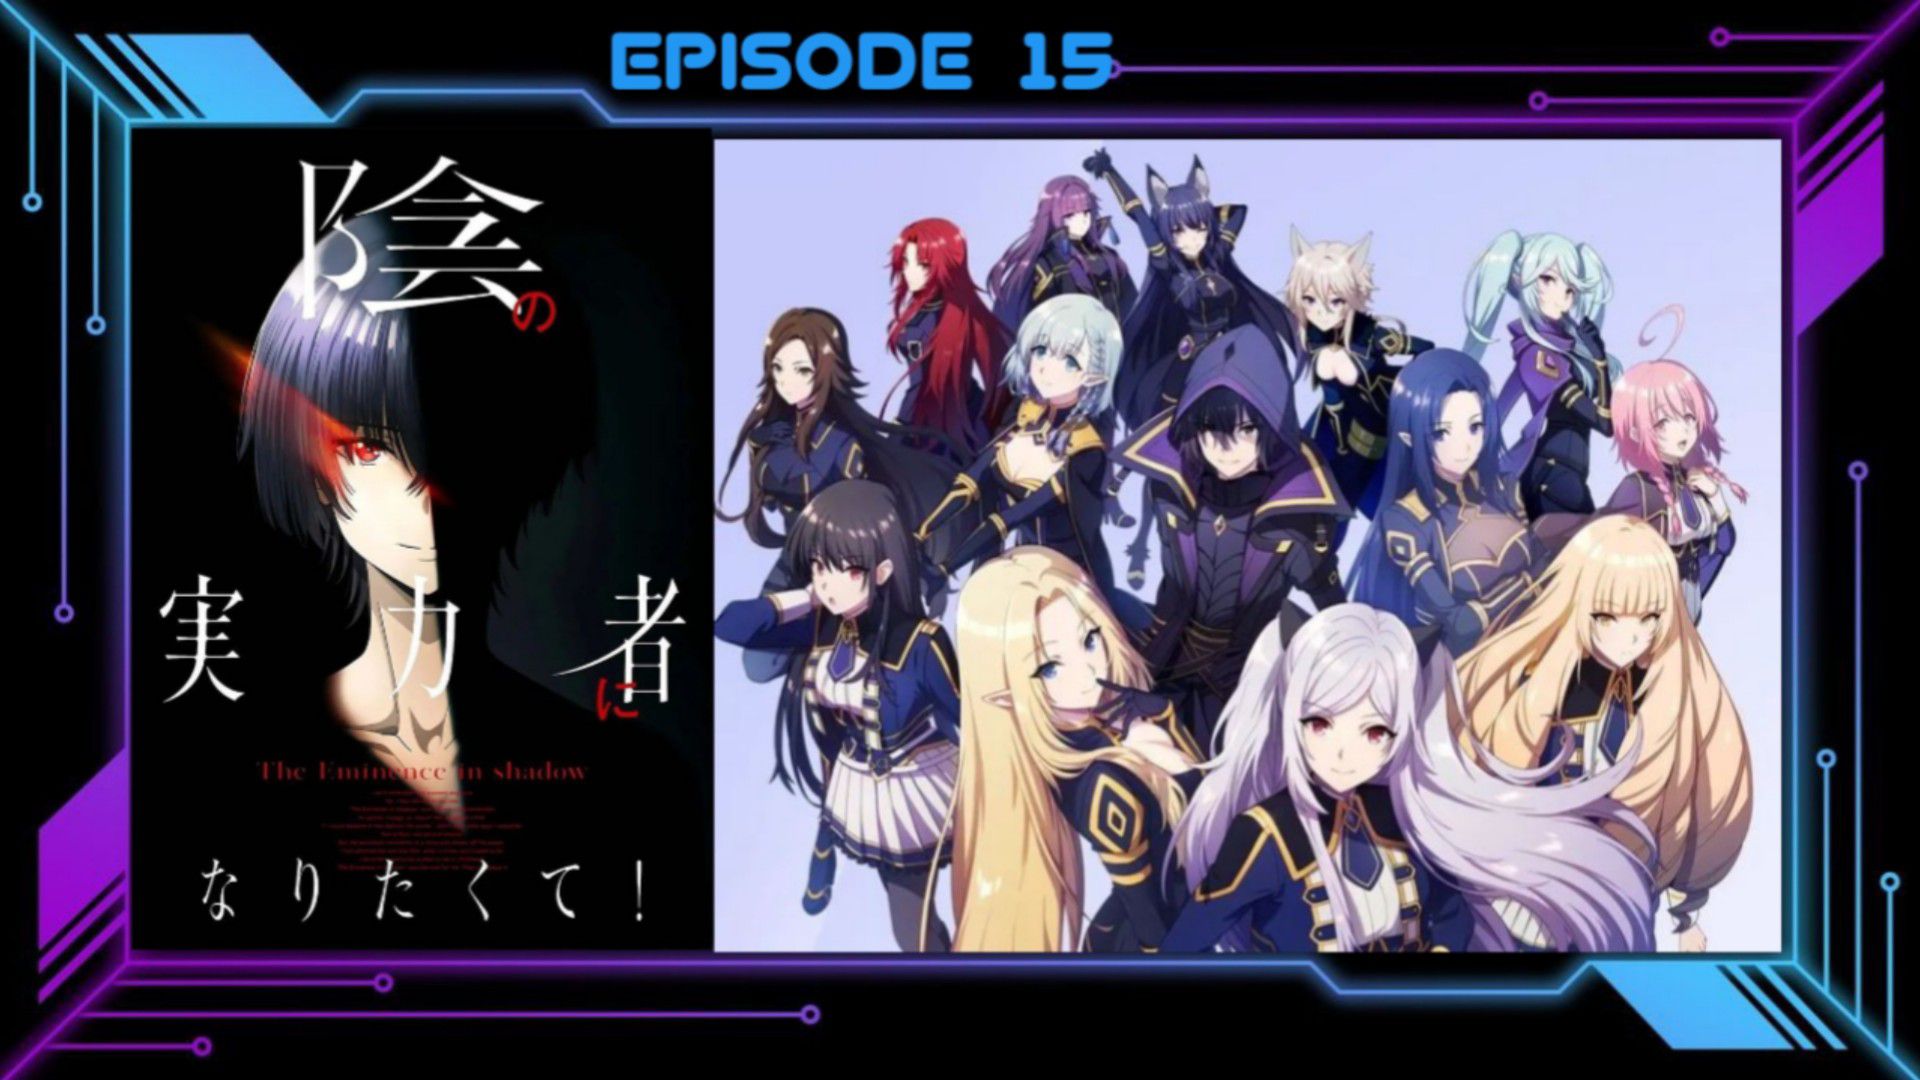 The Eminence in Shadow Episode 15 Preview Released